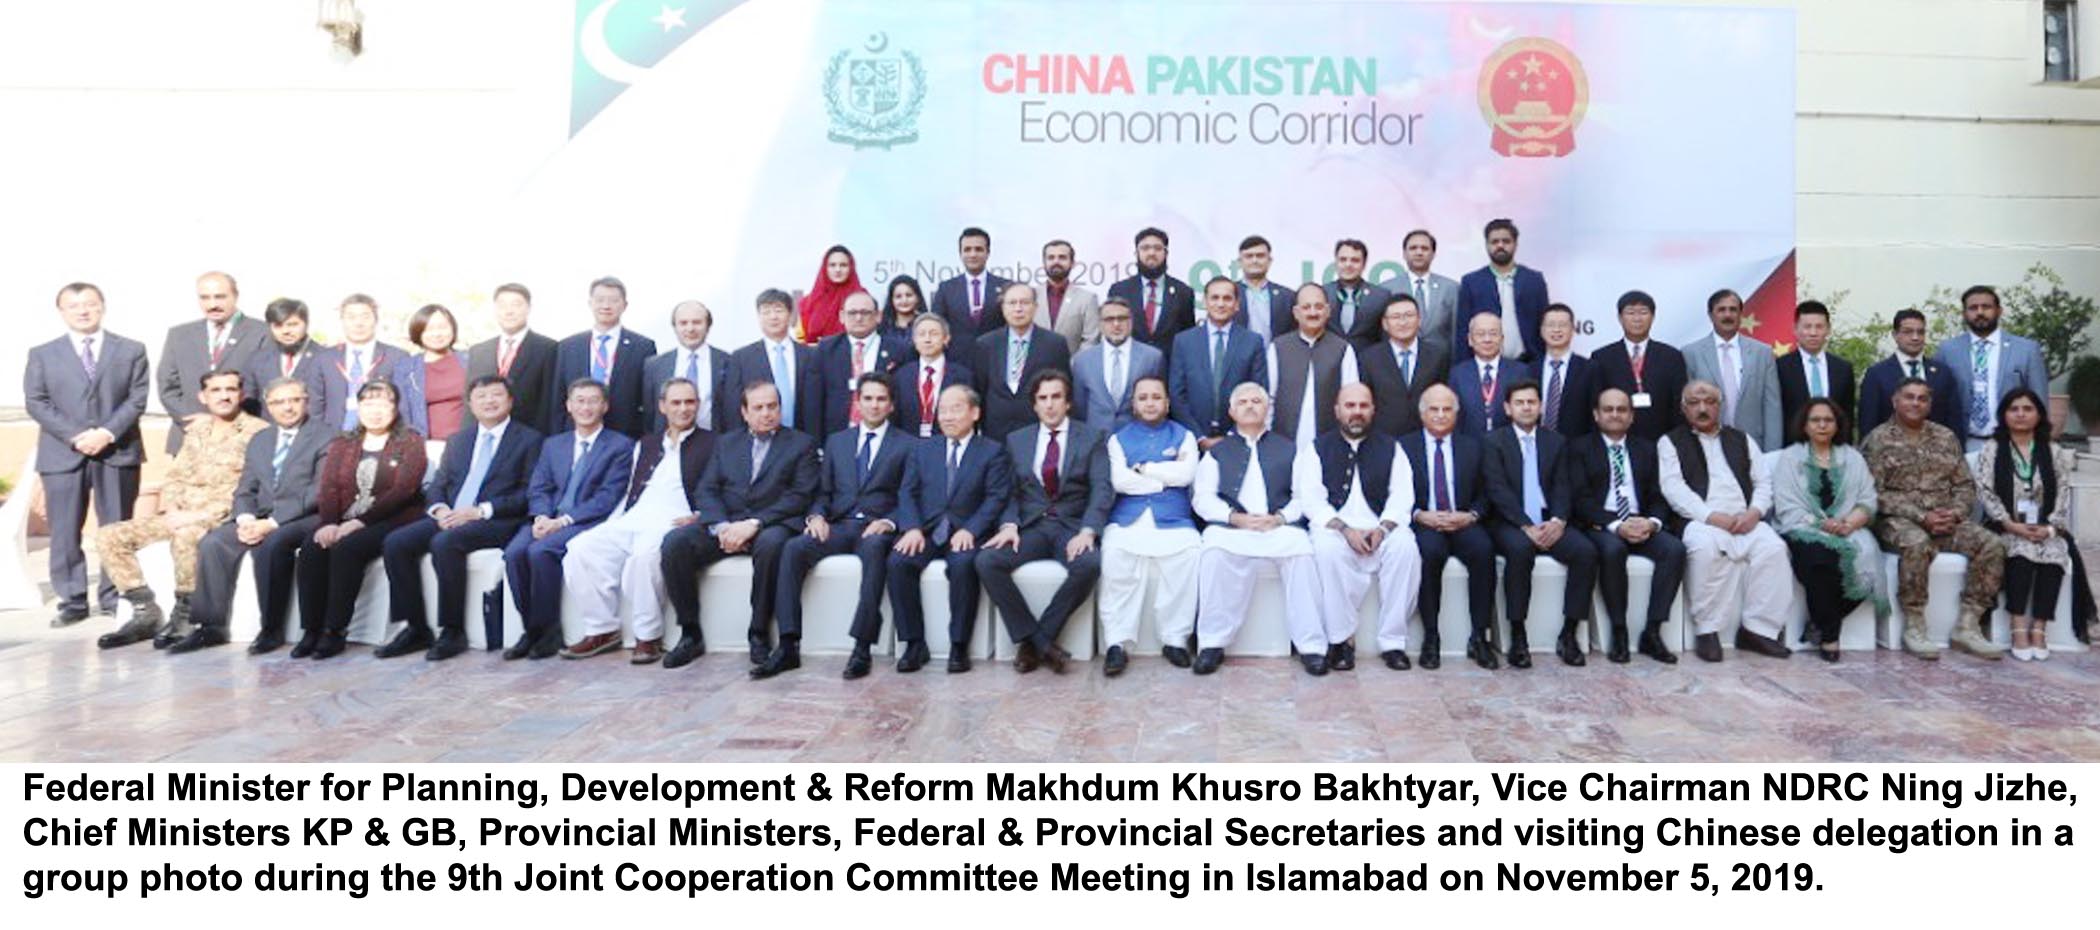 9th Joint Cooperation Committee Meeting held in Islamabad on 05 November 2019.